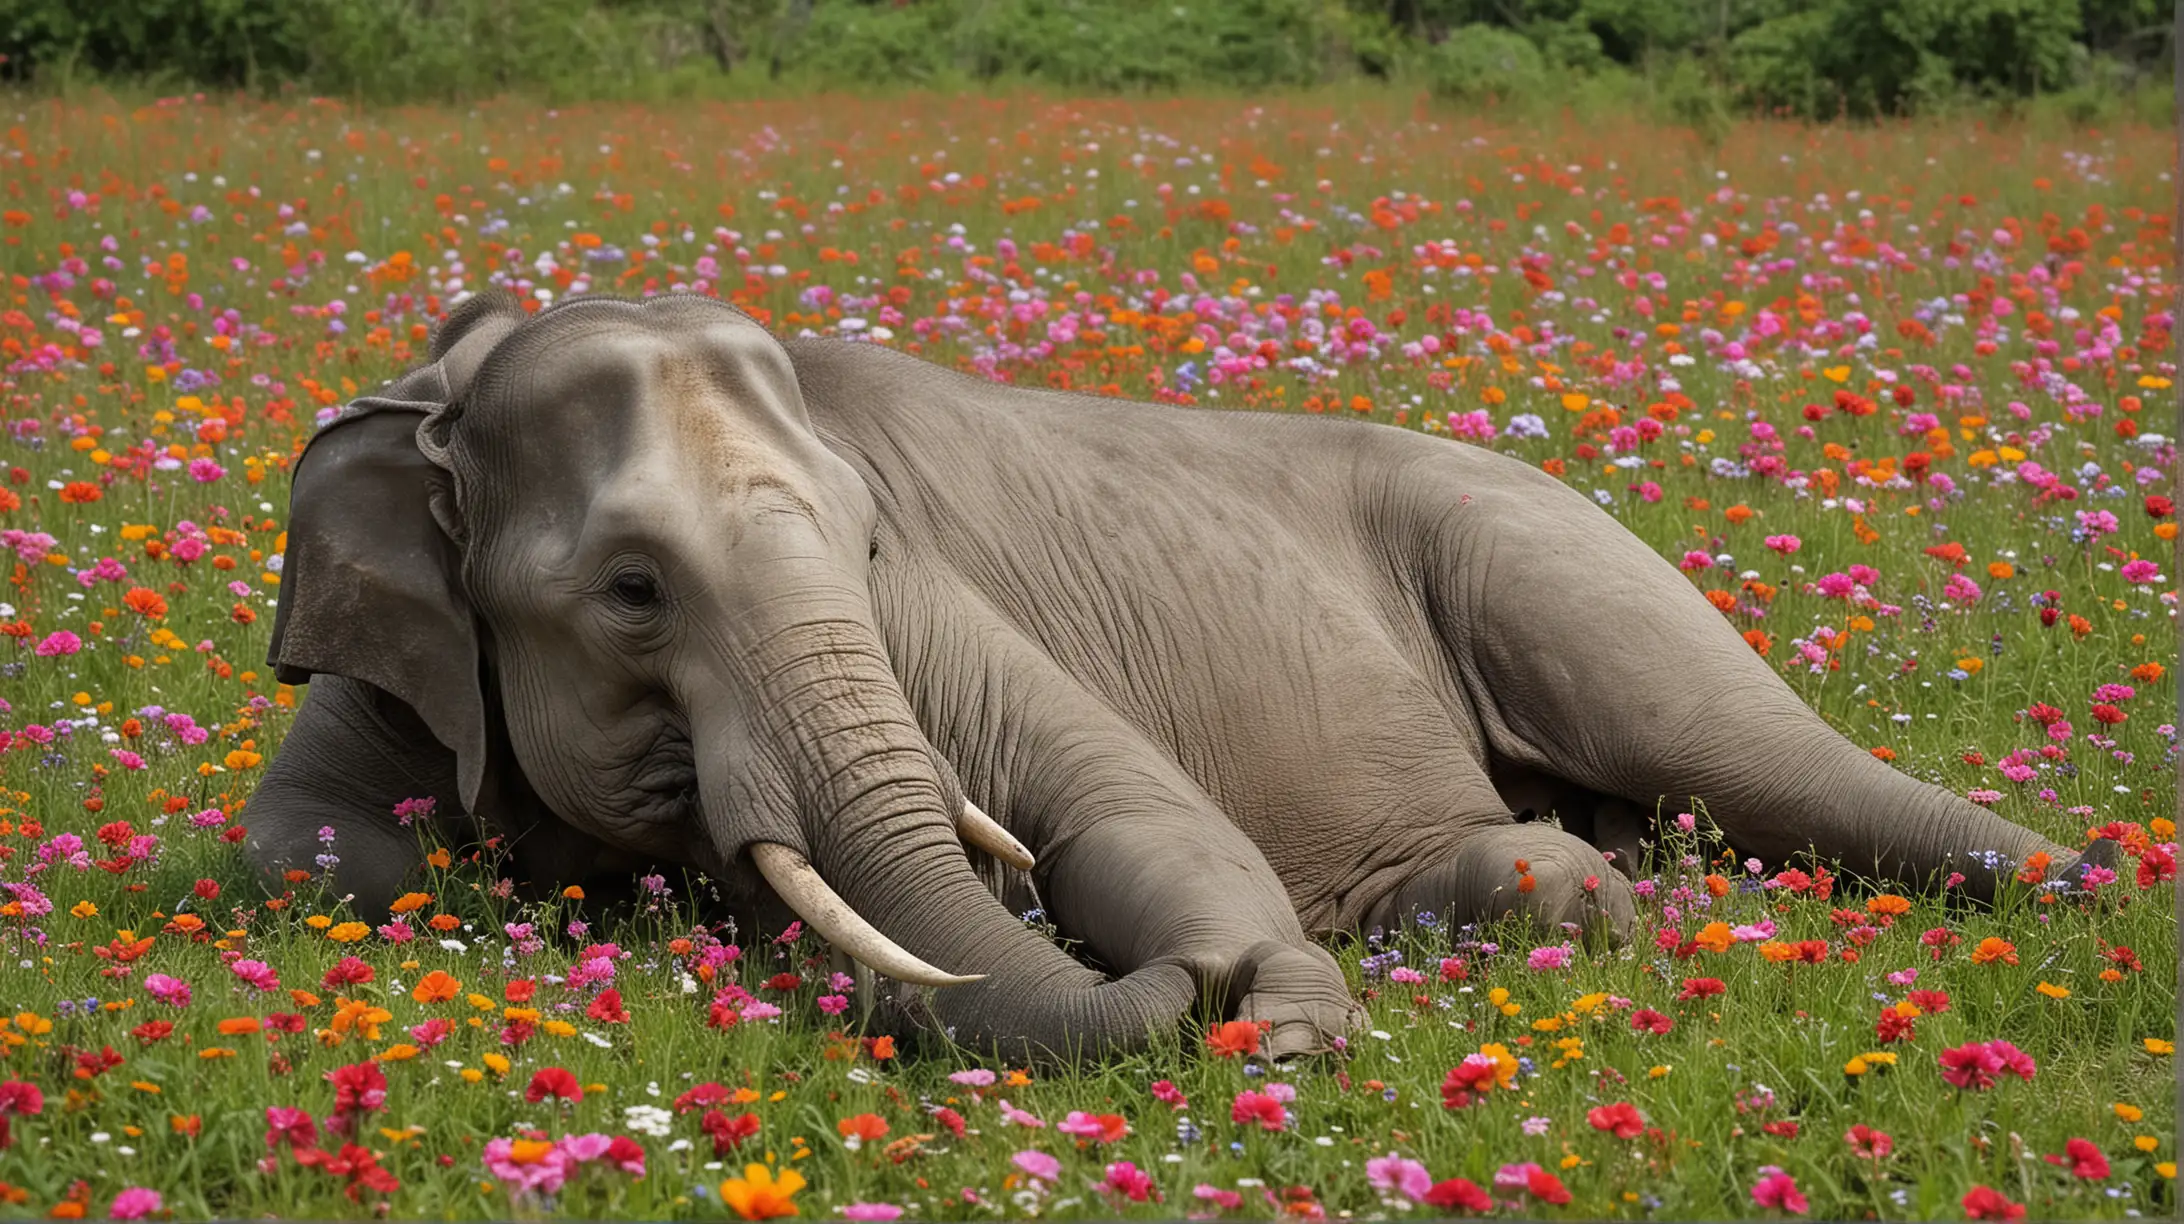 an Thailand elephant lying down in a field filled with colorful flowers. The setting appears to be a natural, open environment—possibly a wildflower field or grassland. The contrast between the Thai elephant’s rough, grey skin and the delicate, vibrant flowers creates a serene and somewhat unusual scene that highlights nature’s diversity.